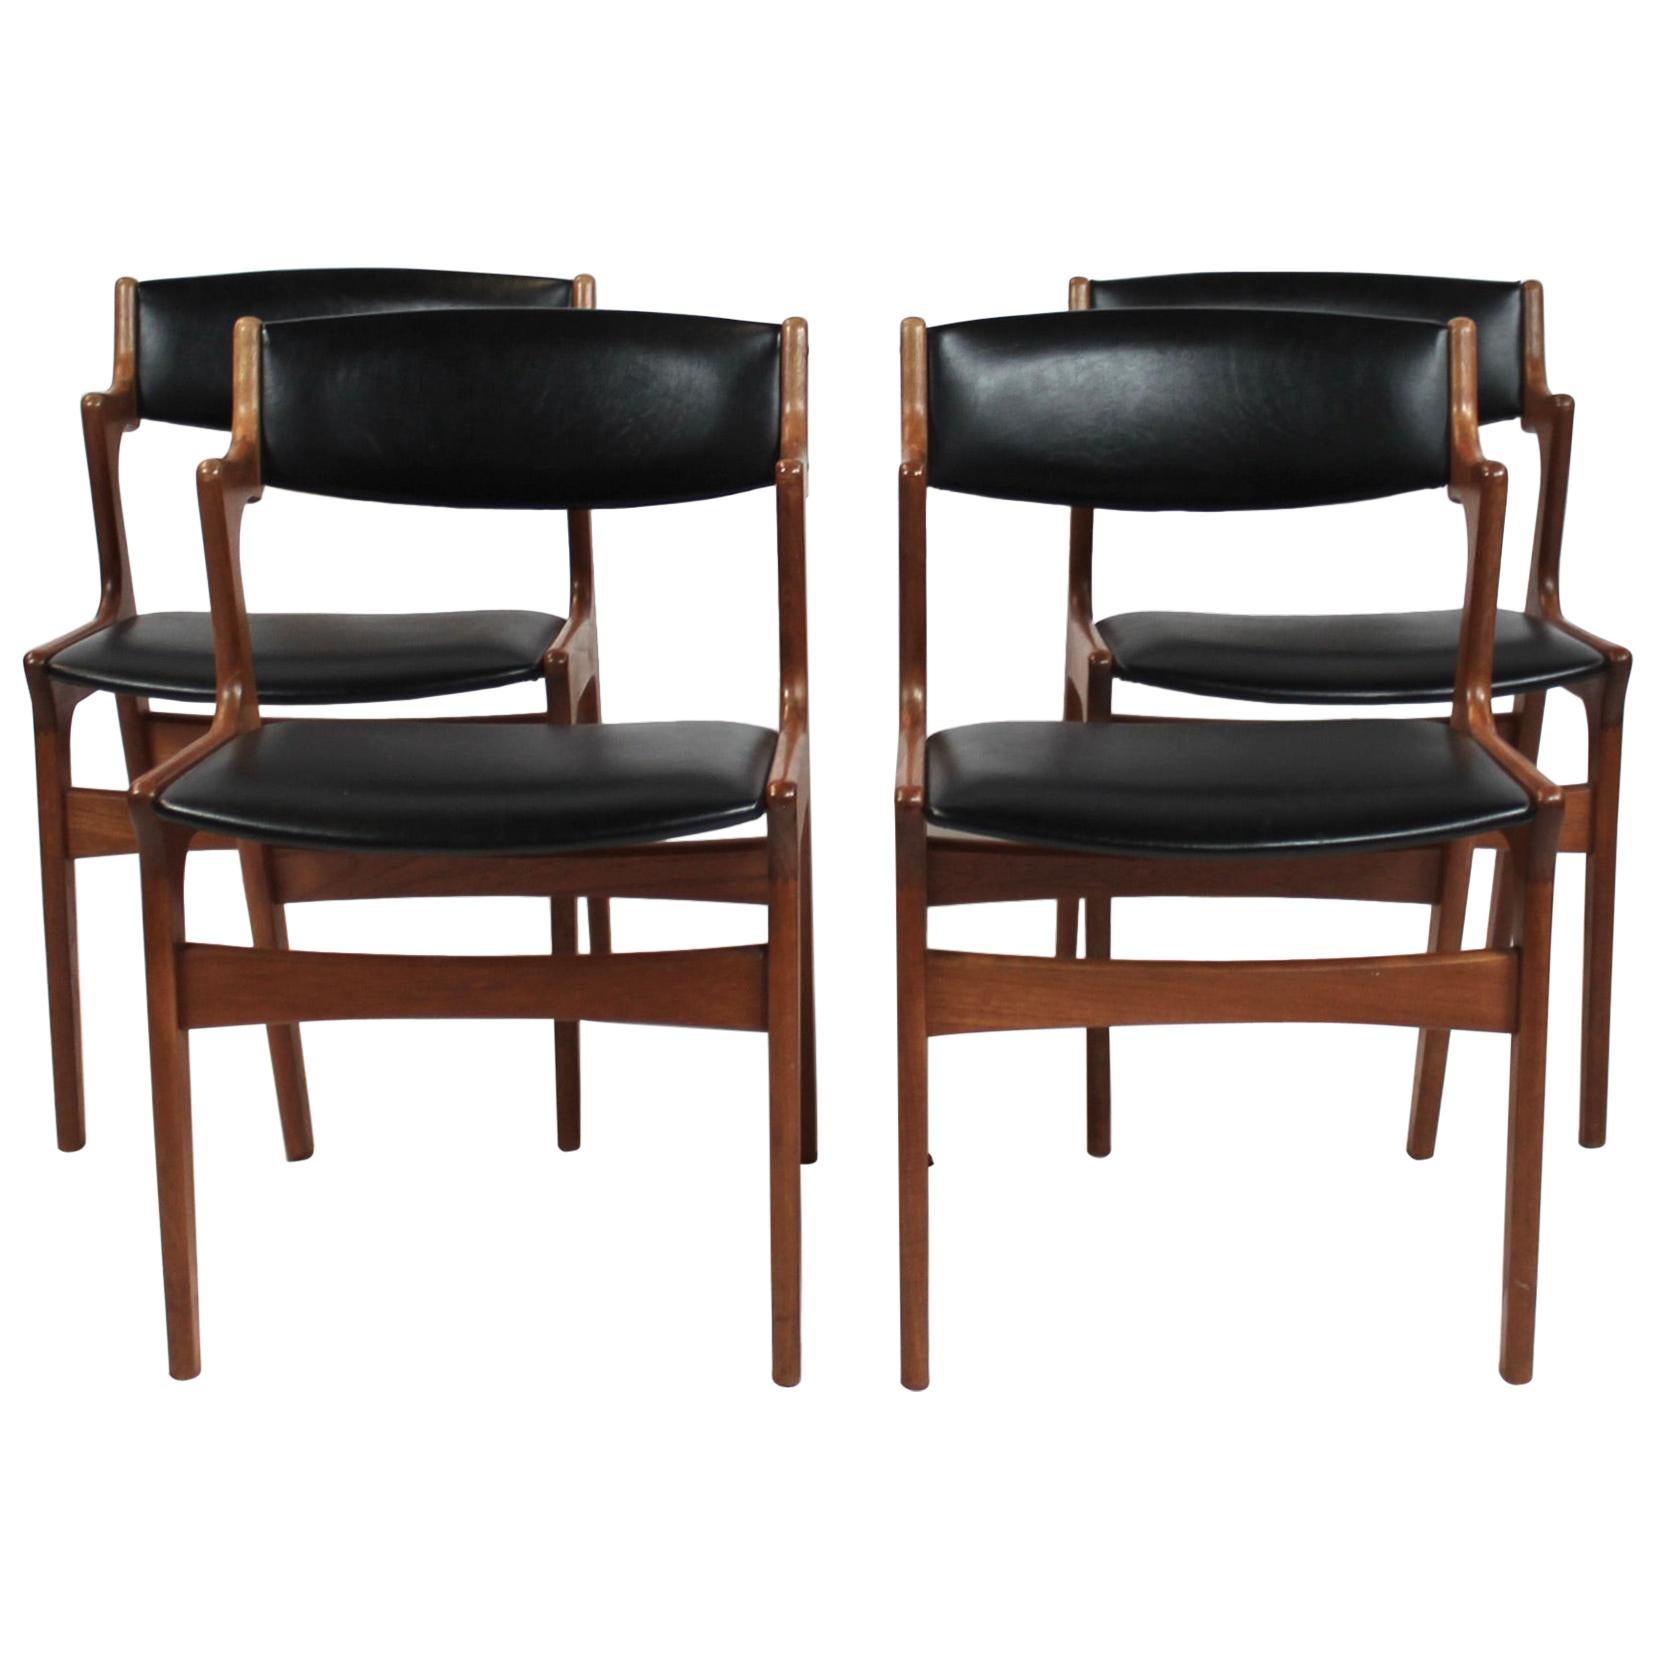 Set of Four Dining Room Chairs of Danish Design by Nova Furniture, 1960s